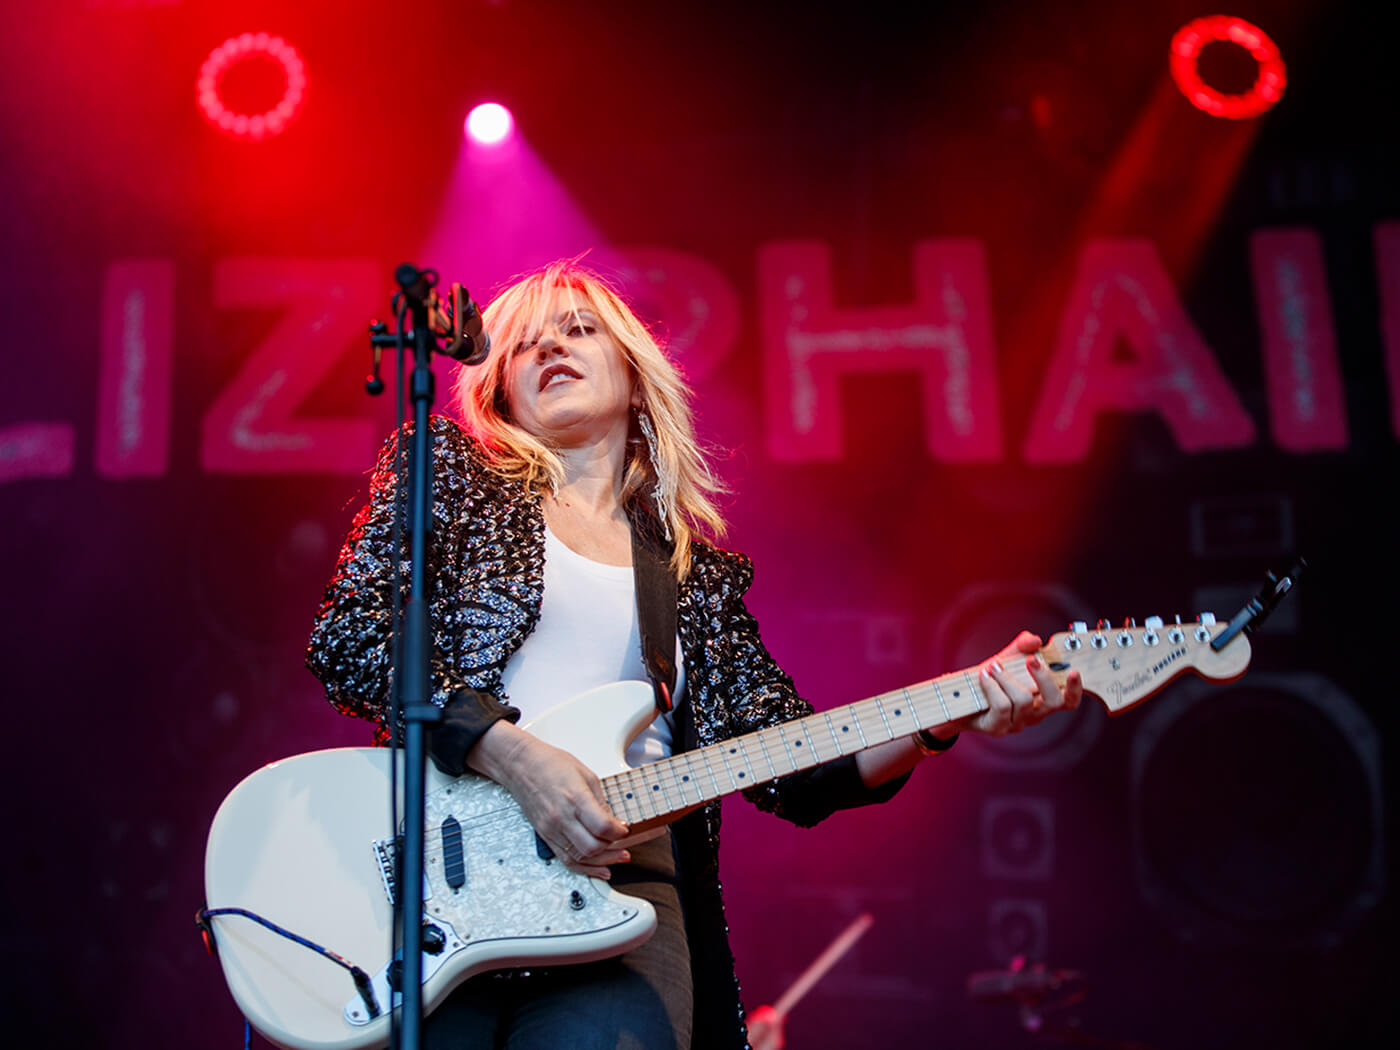 Liz Phair performing at Primavera Sound in 2019 by Xavi Torrent/WireImage via Getty Images